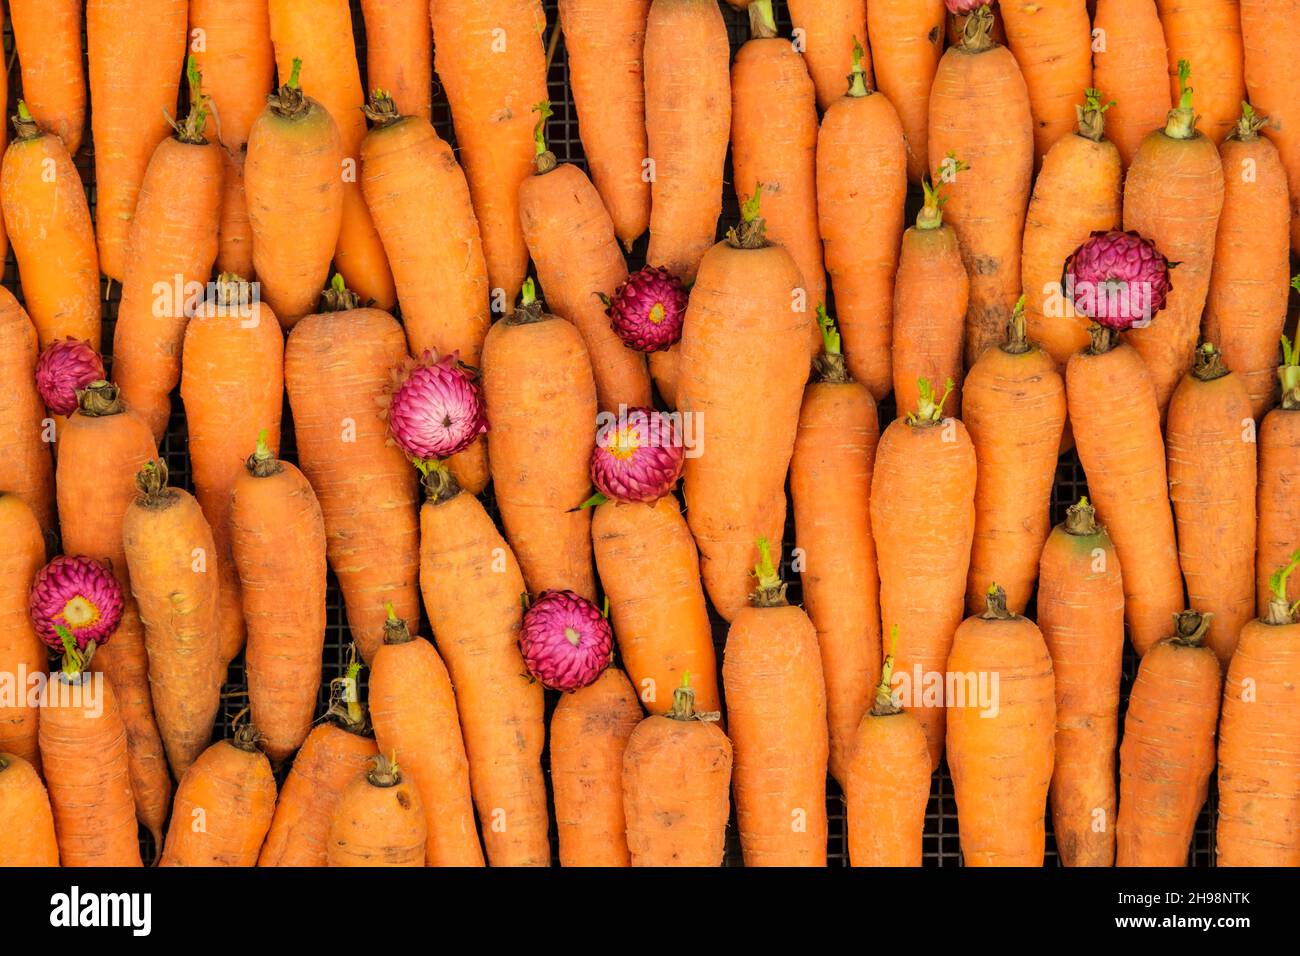 Raw carrots neatly stacked in tray, decorated with everlasting flowers Stock Photo